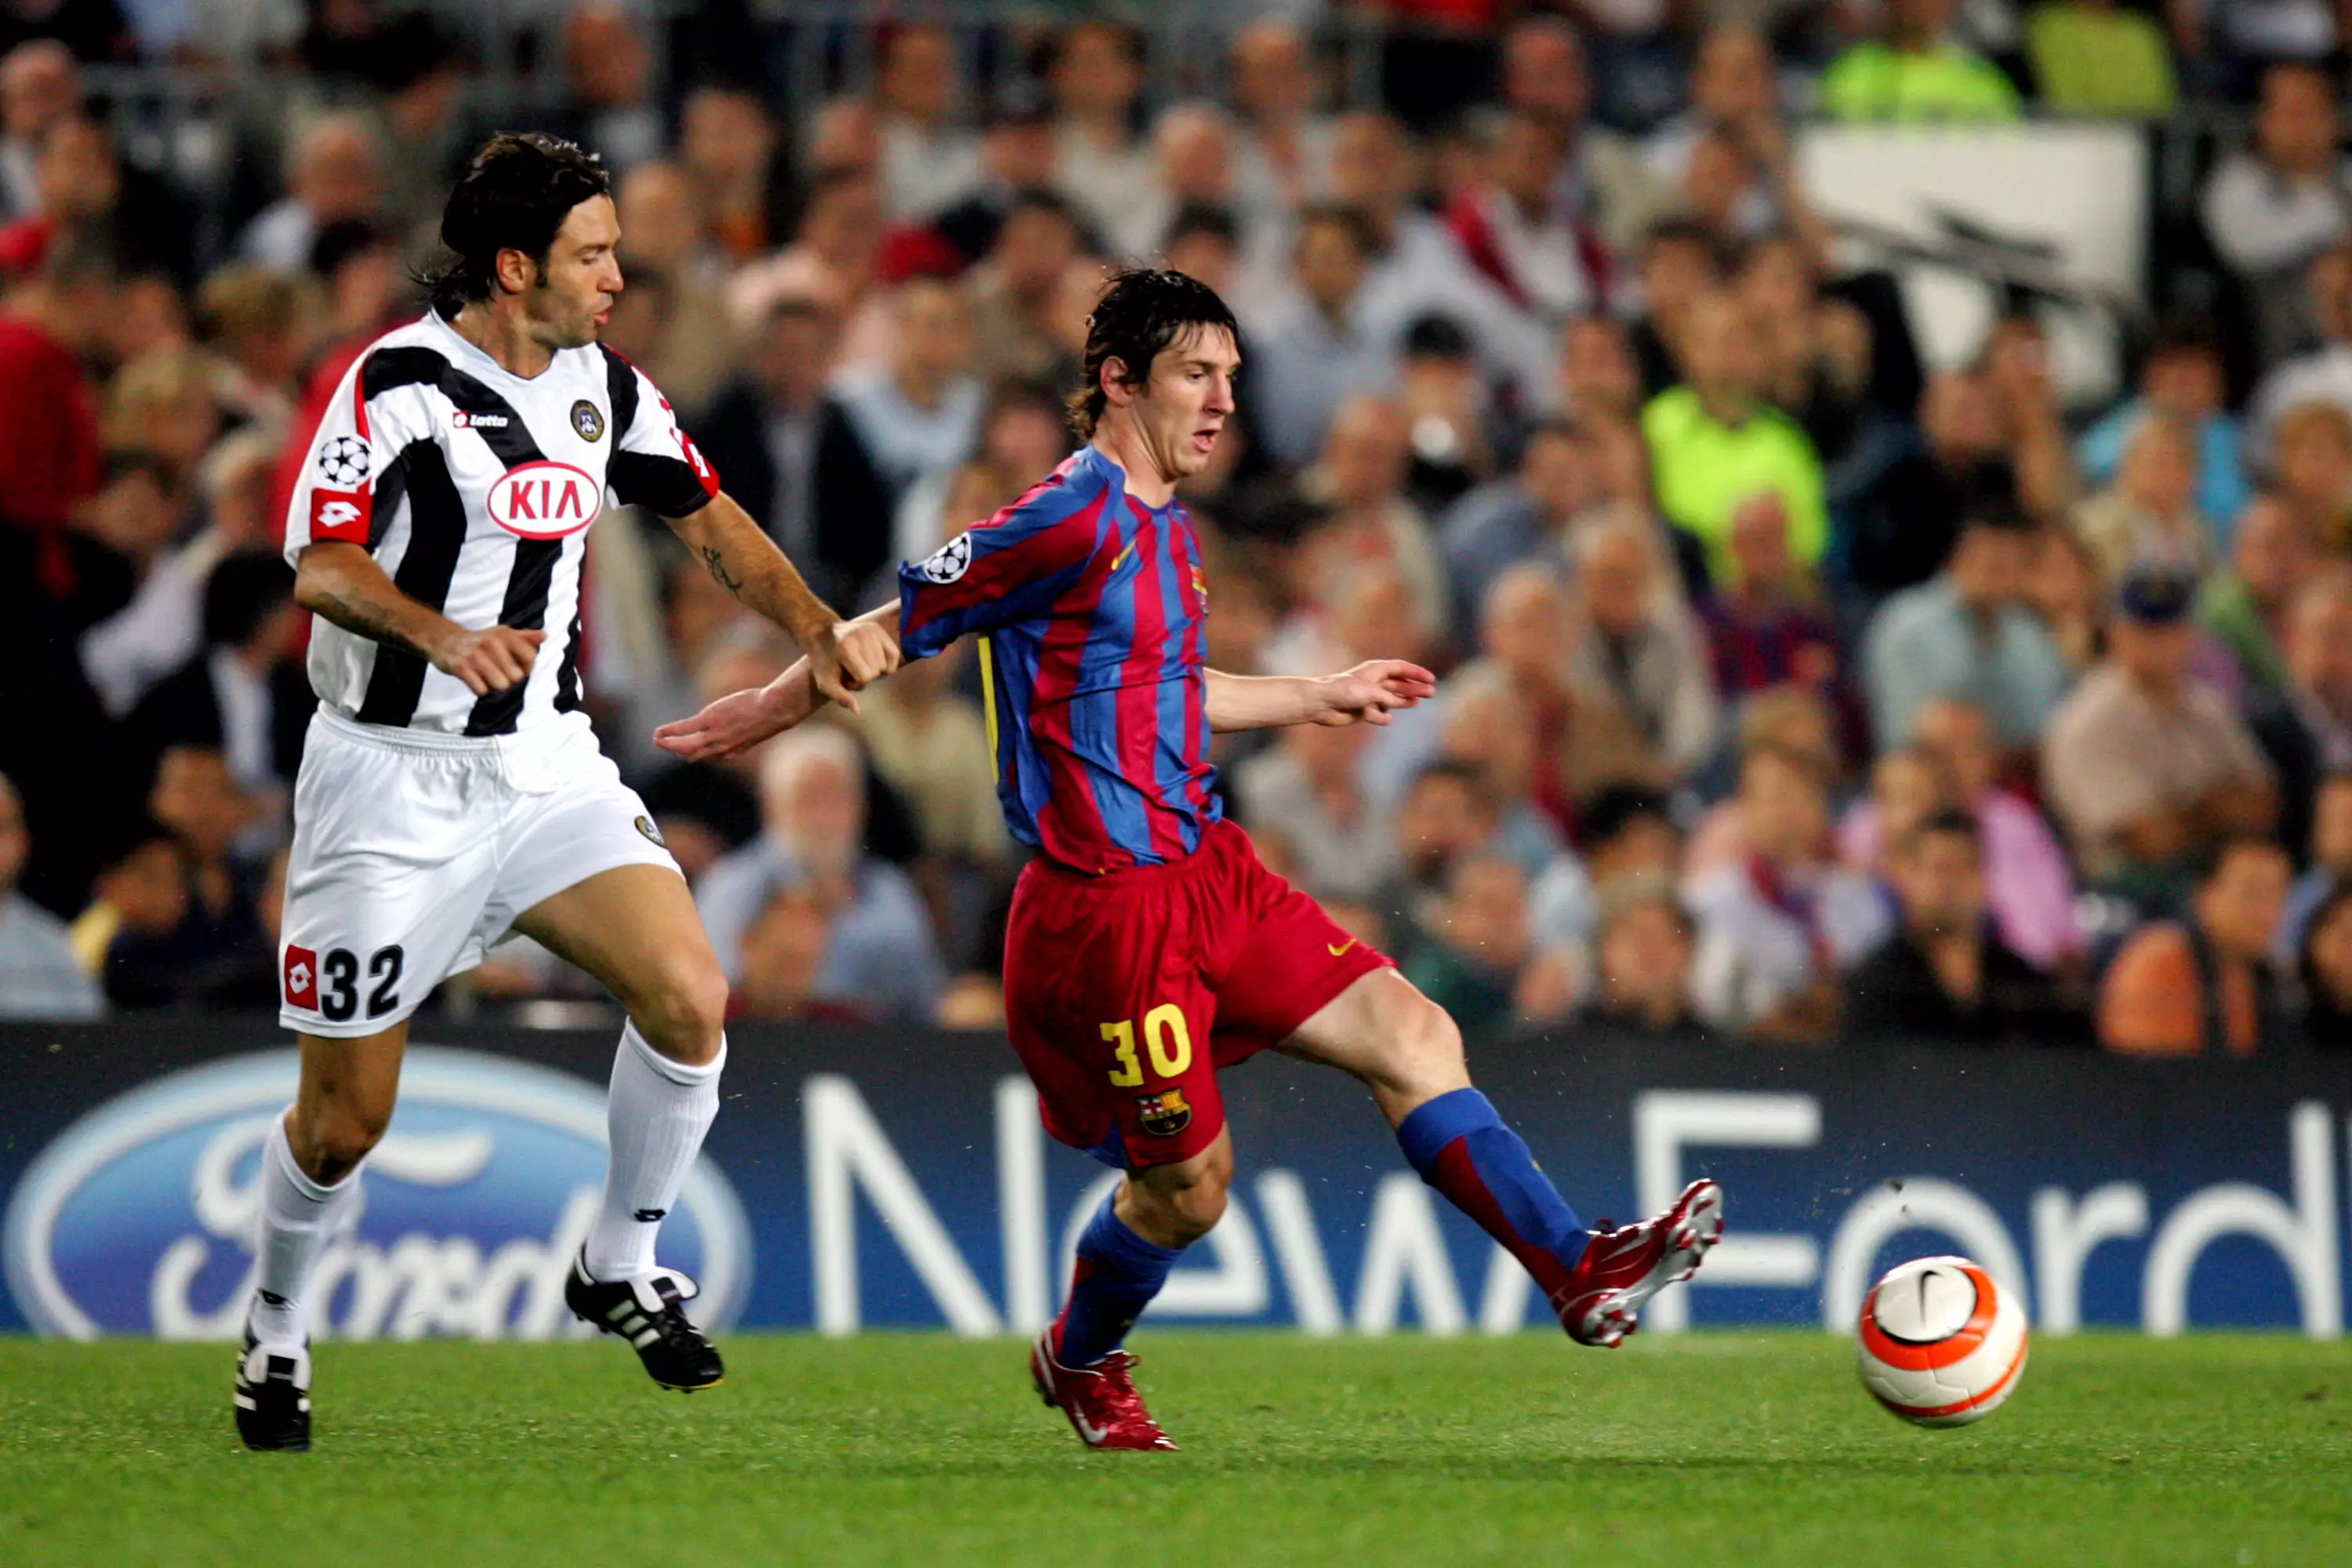 Barcelona's Lionel Messi and Udinese's Vincent Candela battle for the ball in 2005. Image: PA